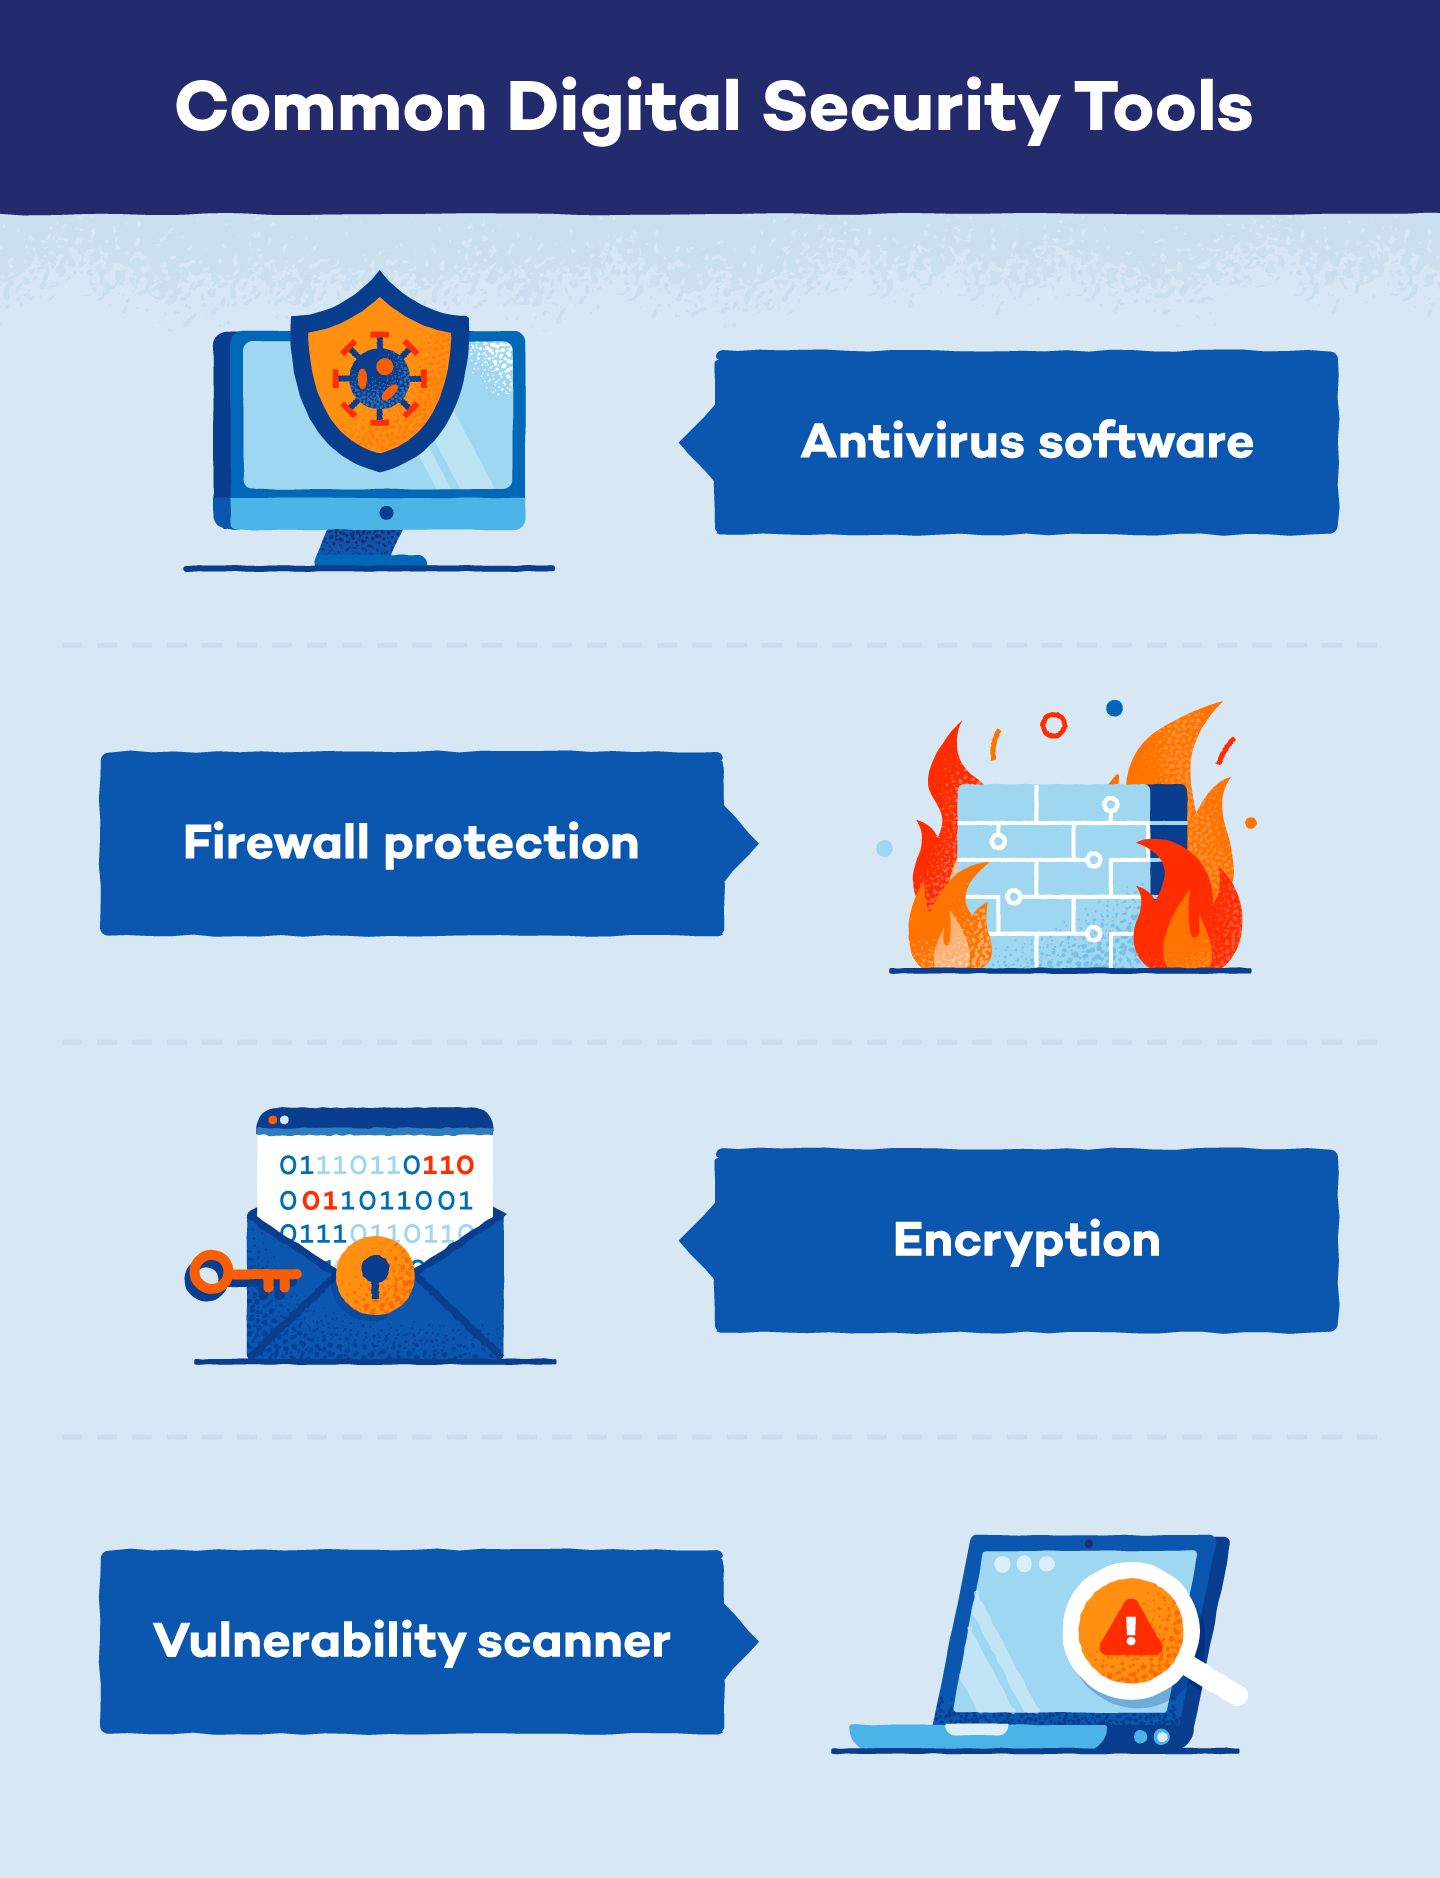 Graphic showing common security tools including antivirus software, firewall protection, encryption, and vulnerability scanner.